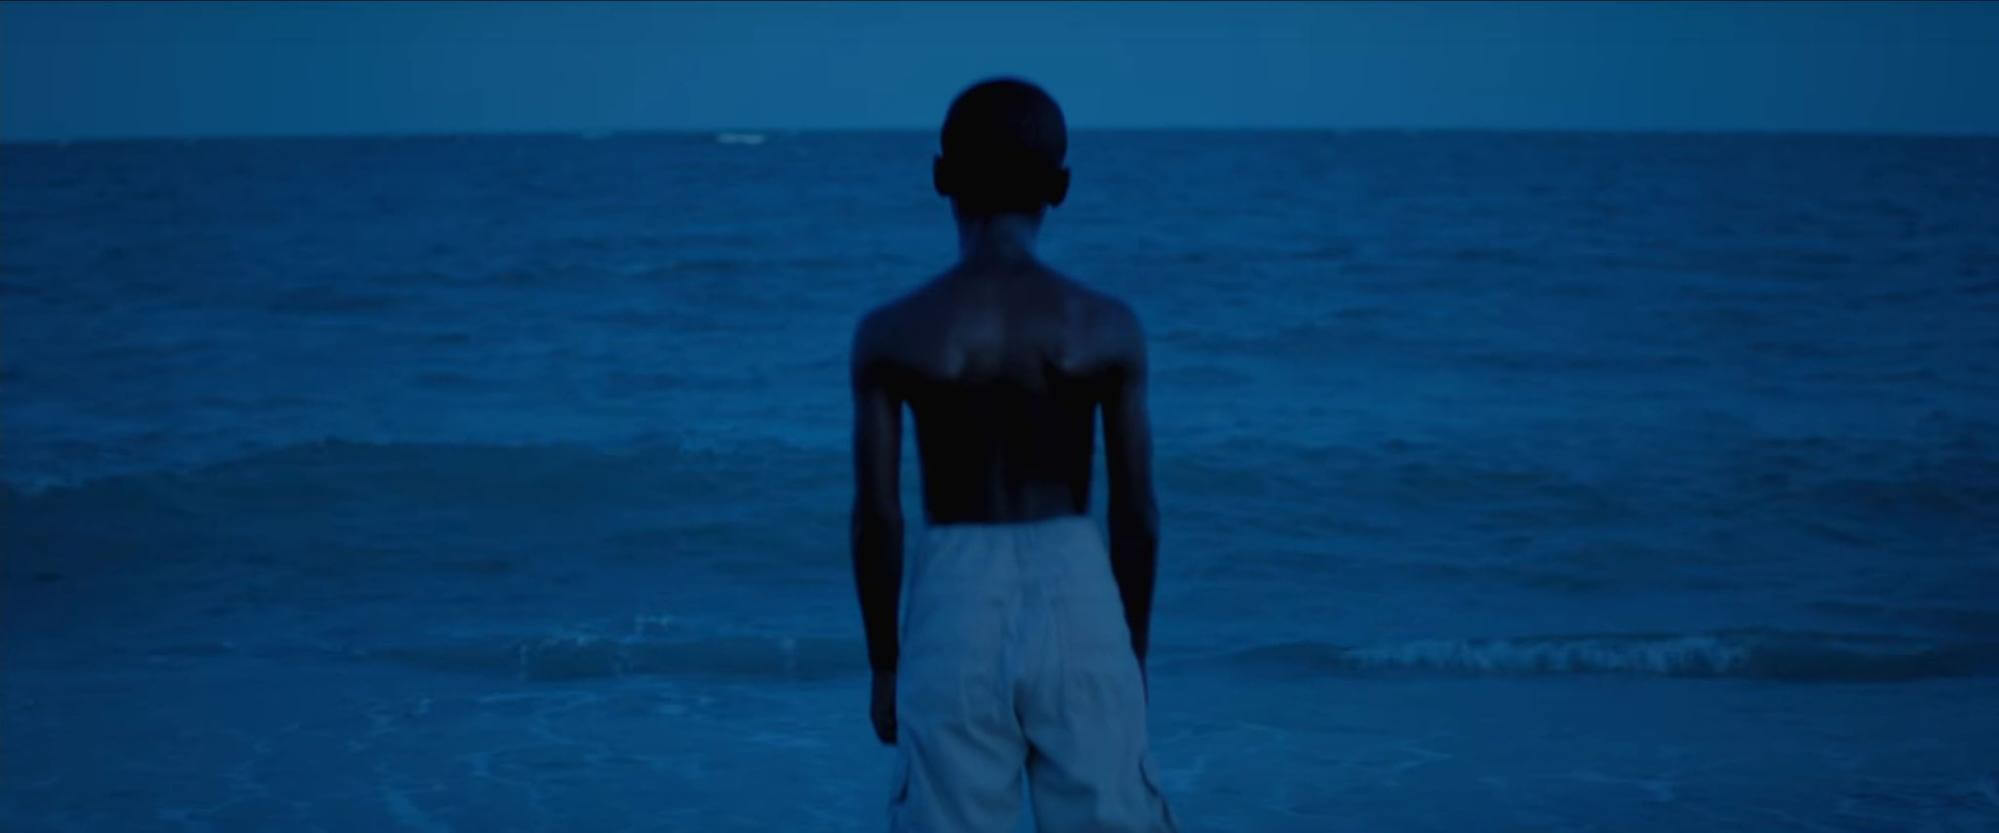 What is an Indie Film Moonlight by Barry Jenkins StudioBinder